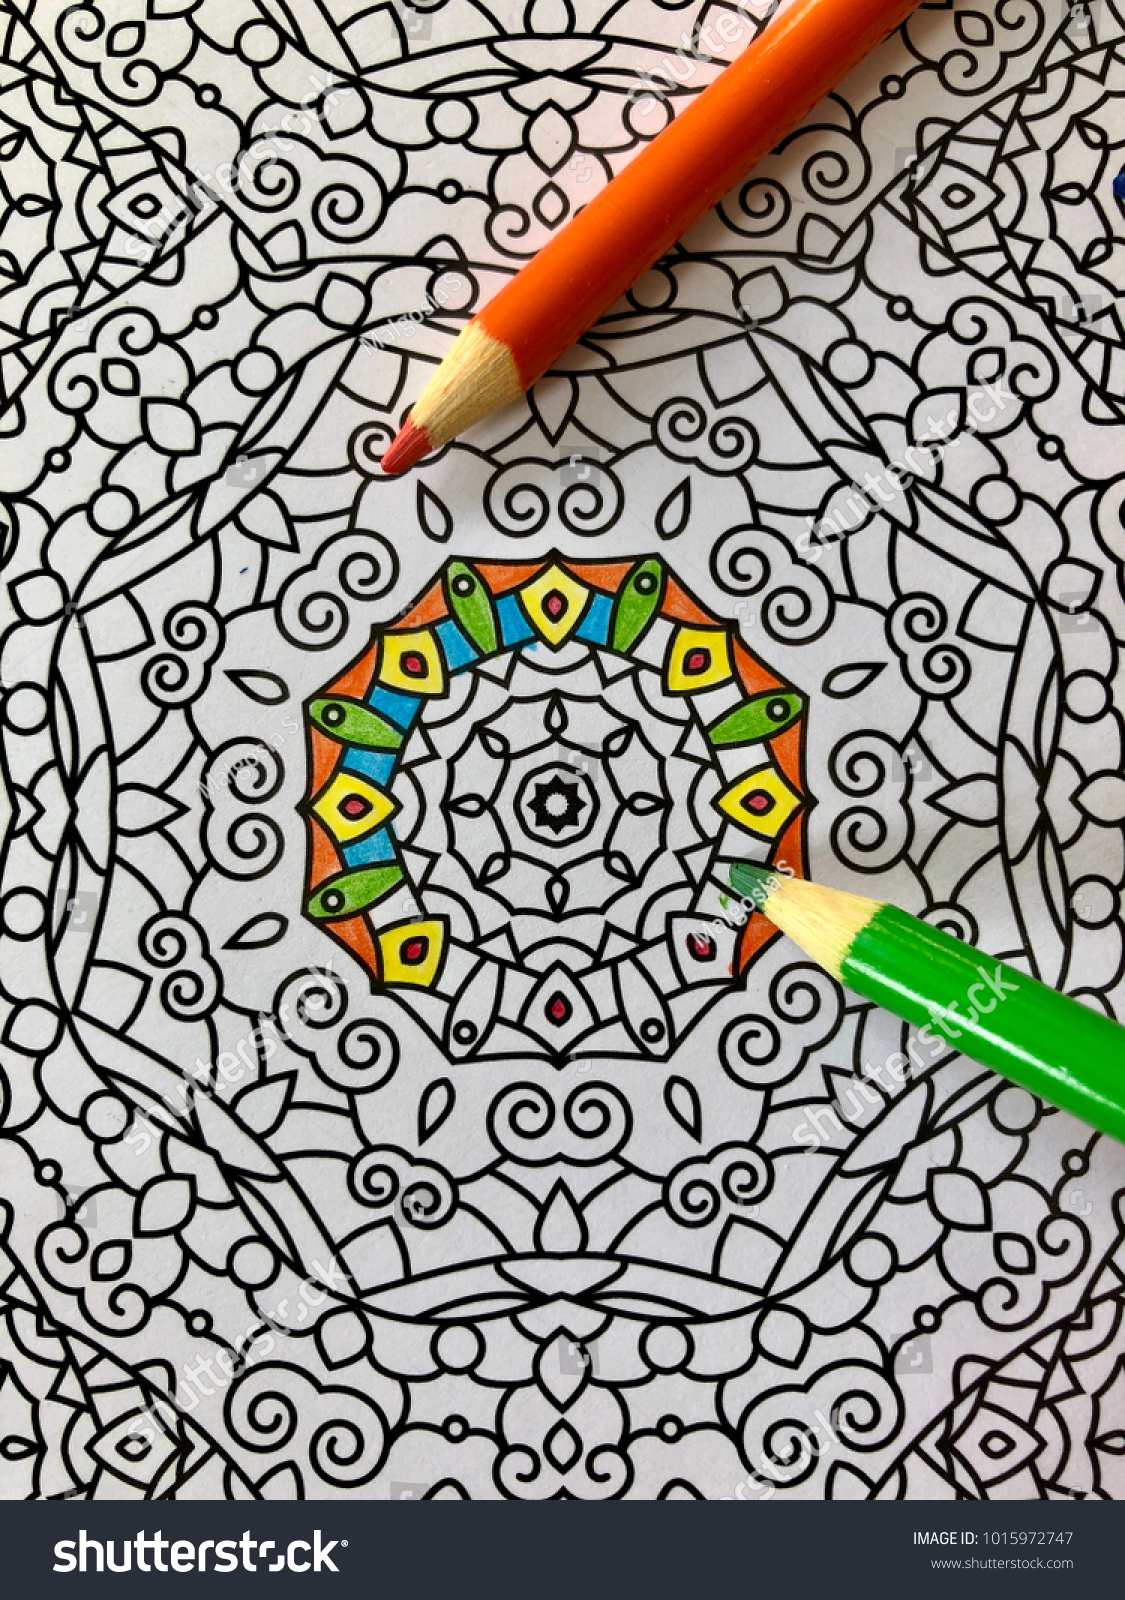 Partially pleted coloring page adult coloring stock photo